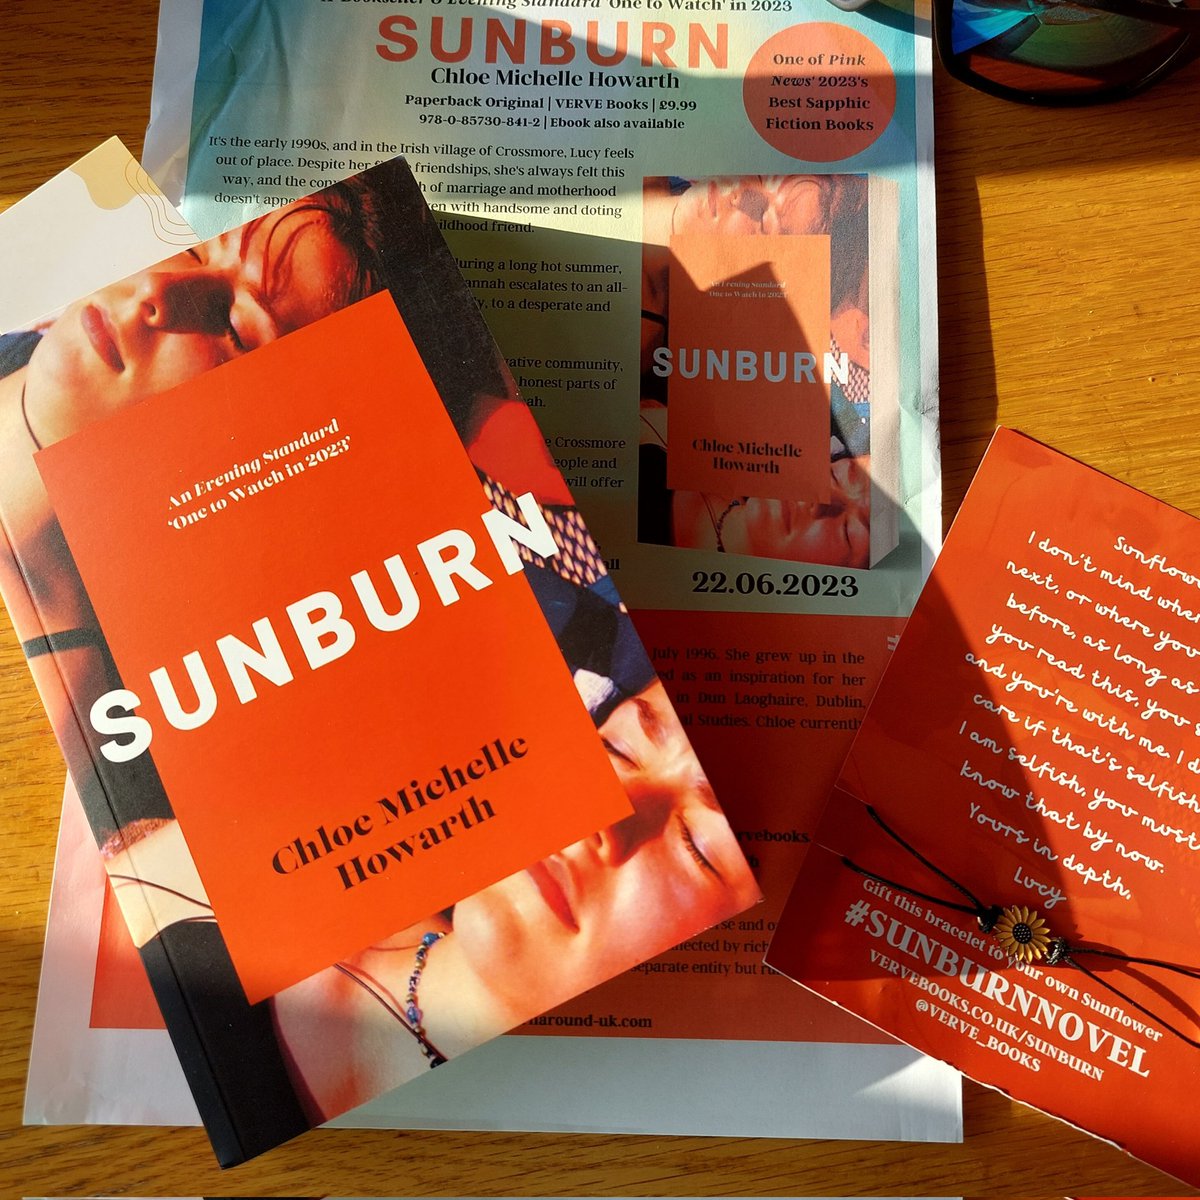 Wishing @ChloeMHowarth a very happy publication day for Sunburn. My review will be up later today but it's incredibly well written, dripping with angst and lust and a sizzling slow burn romance. Thanks to @verve for my gorgeous copy #AD #Sunburn #publicationDay #fiction